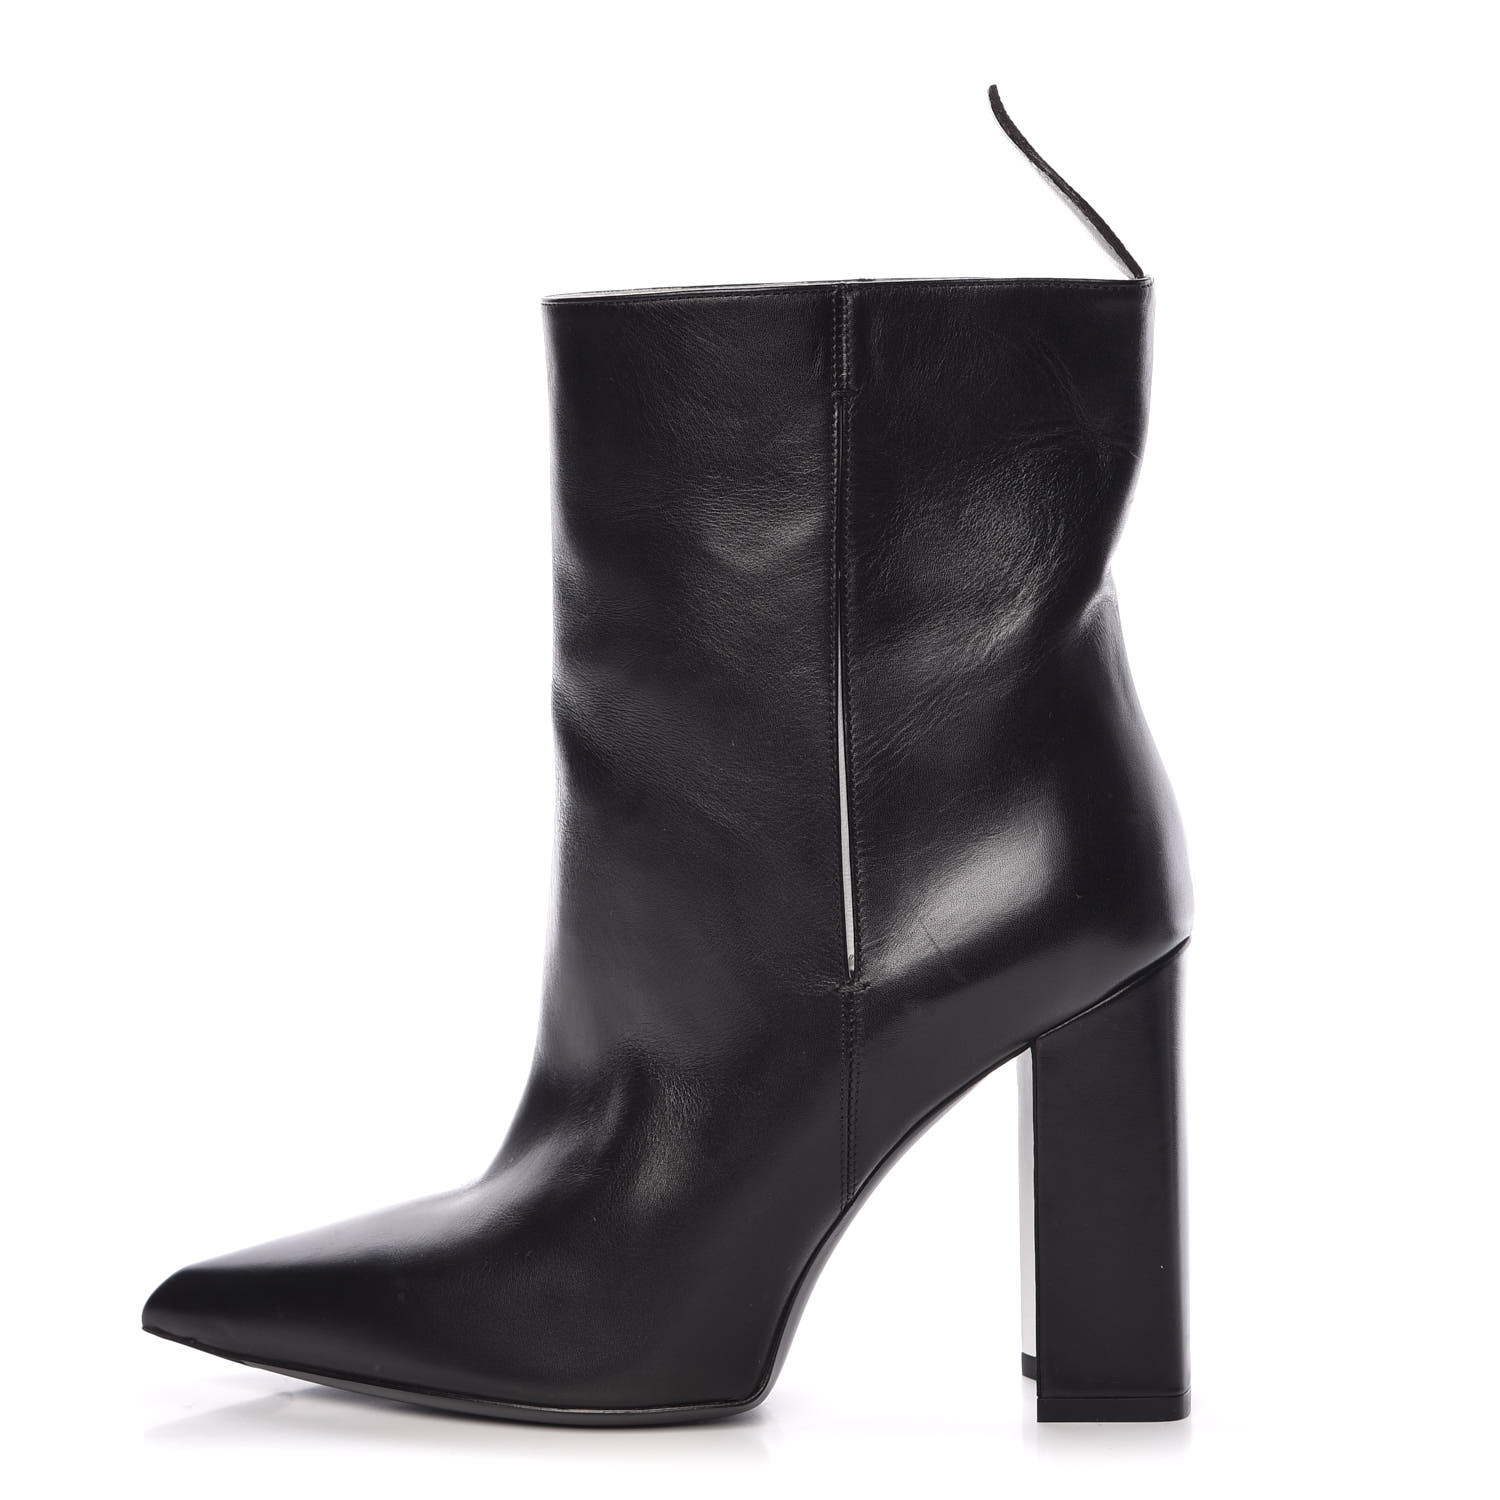 matchmake ankle boot louis vuitton